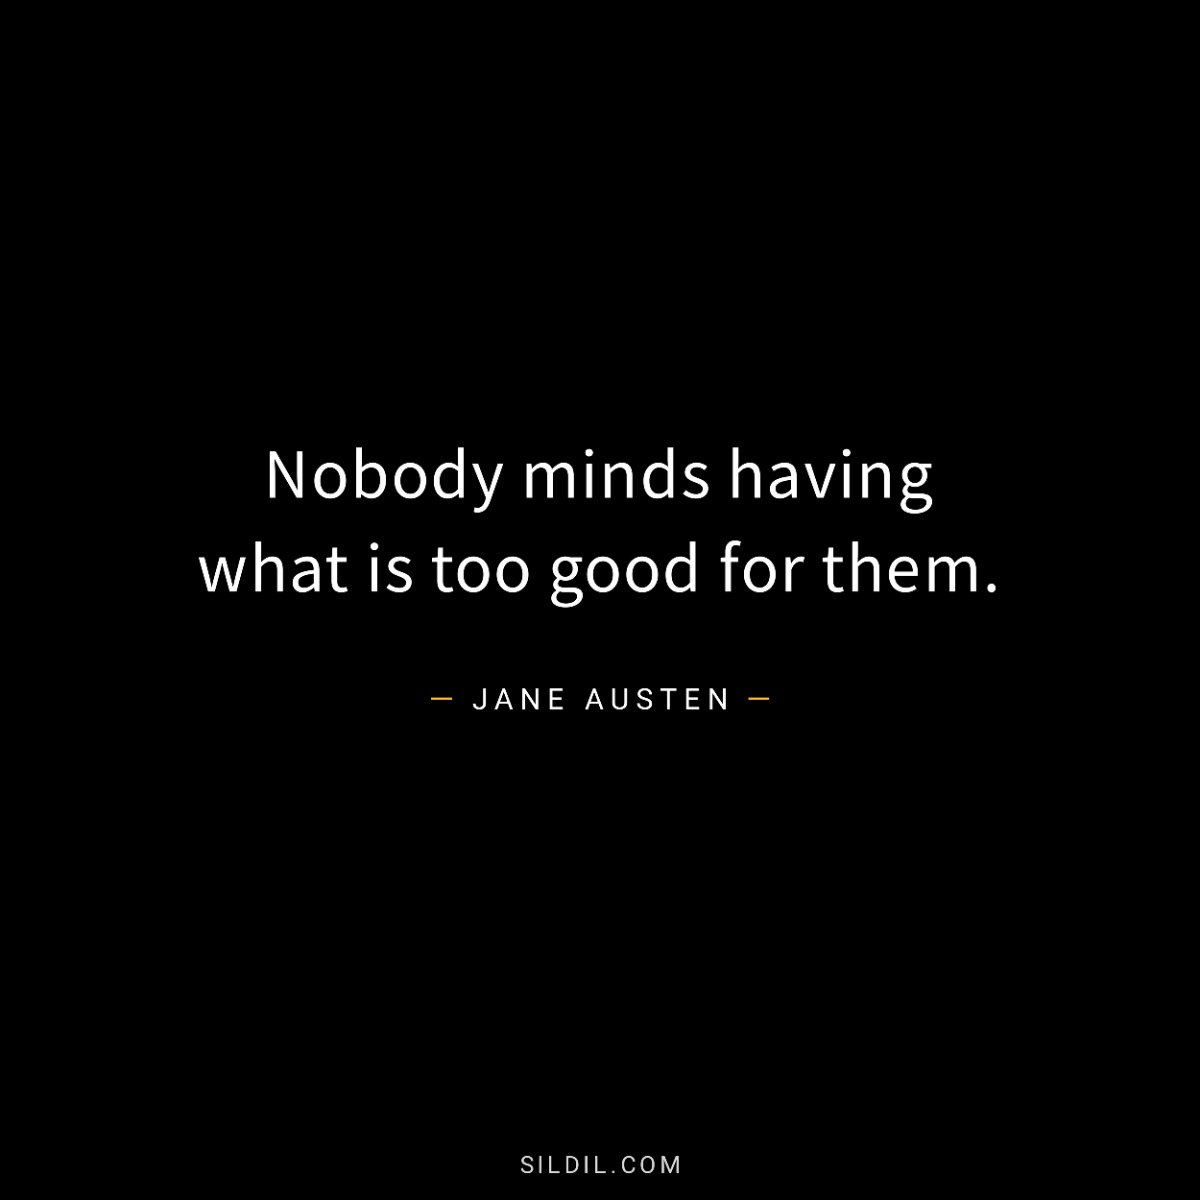 Nobody minds having what is too good for them.